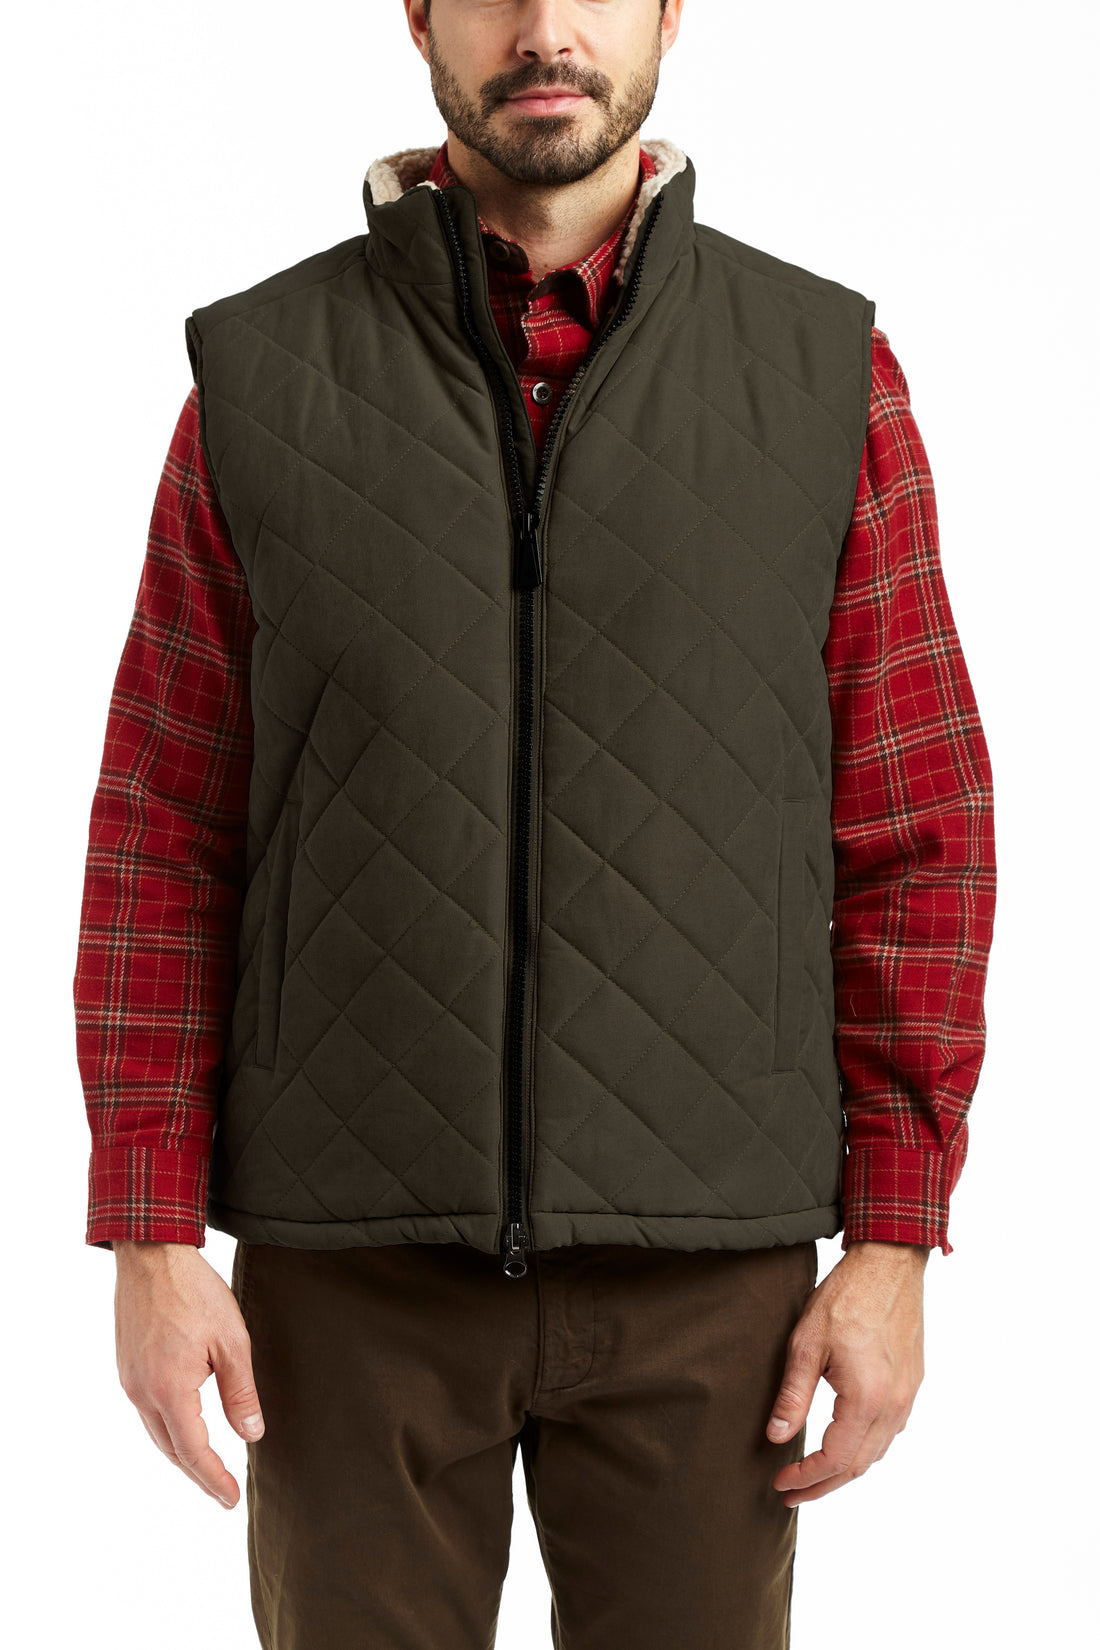 MICRO OXFORD with SHERPA LINED VEST